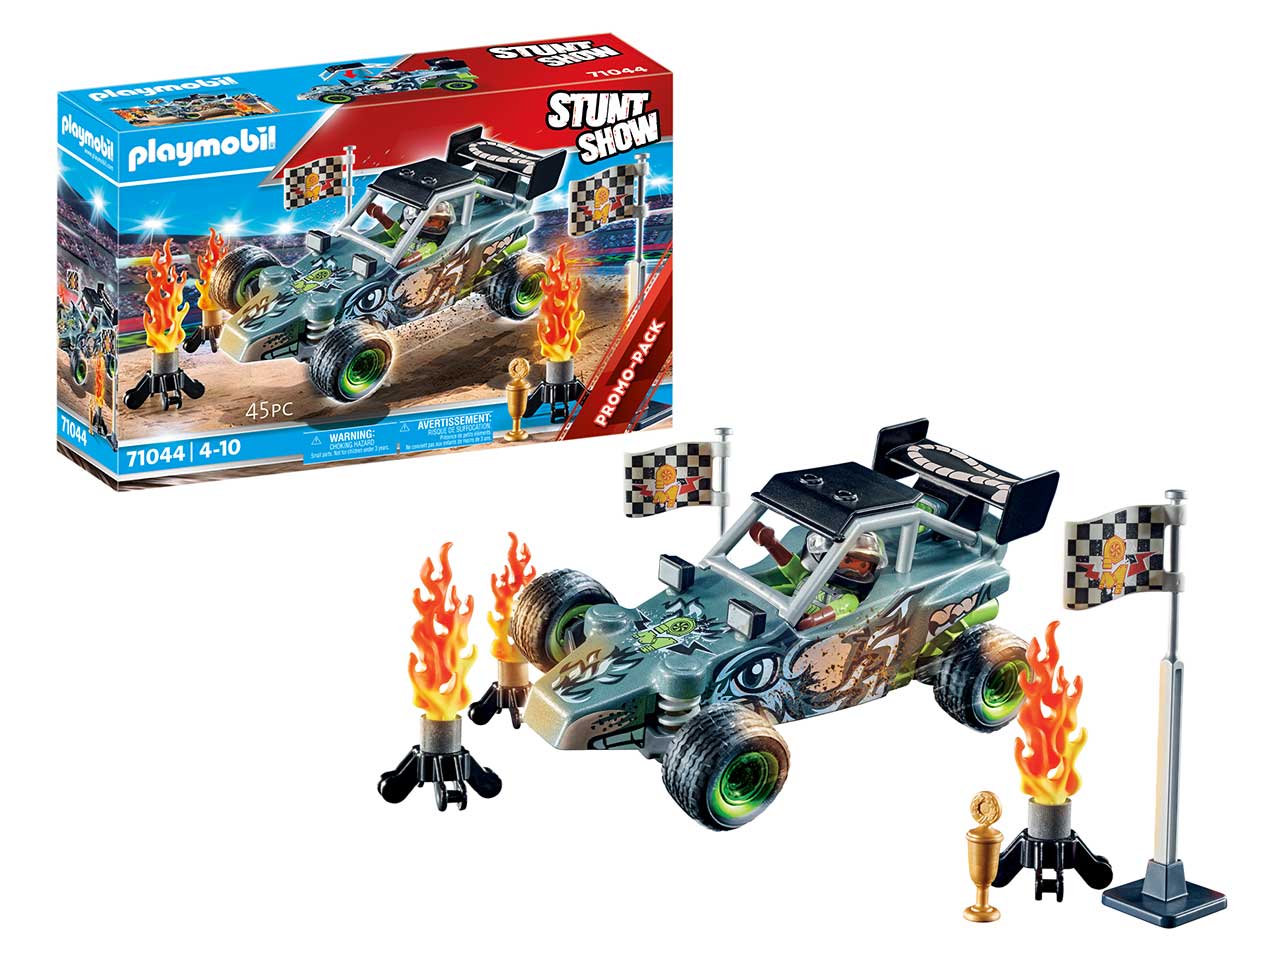 Playmobil stunt show offroad buggy